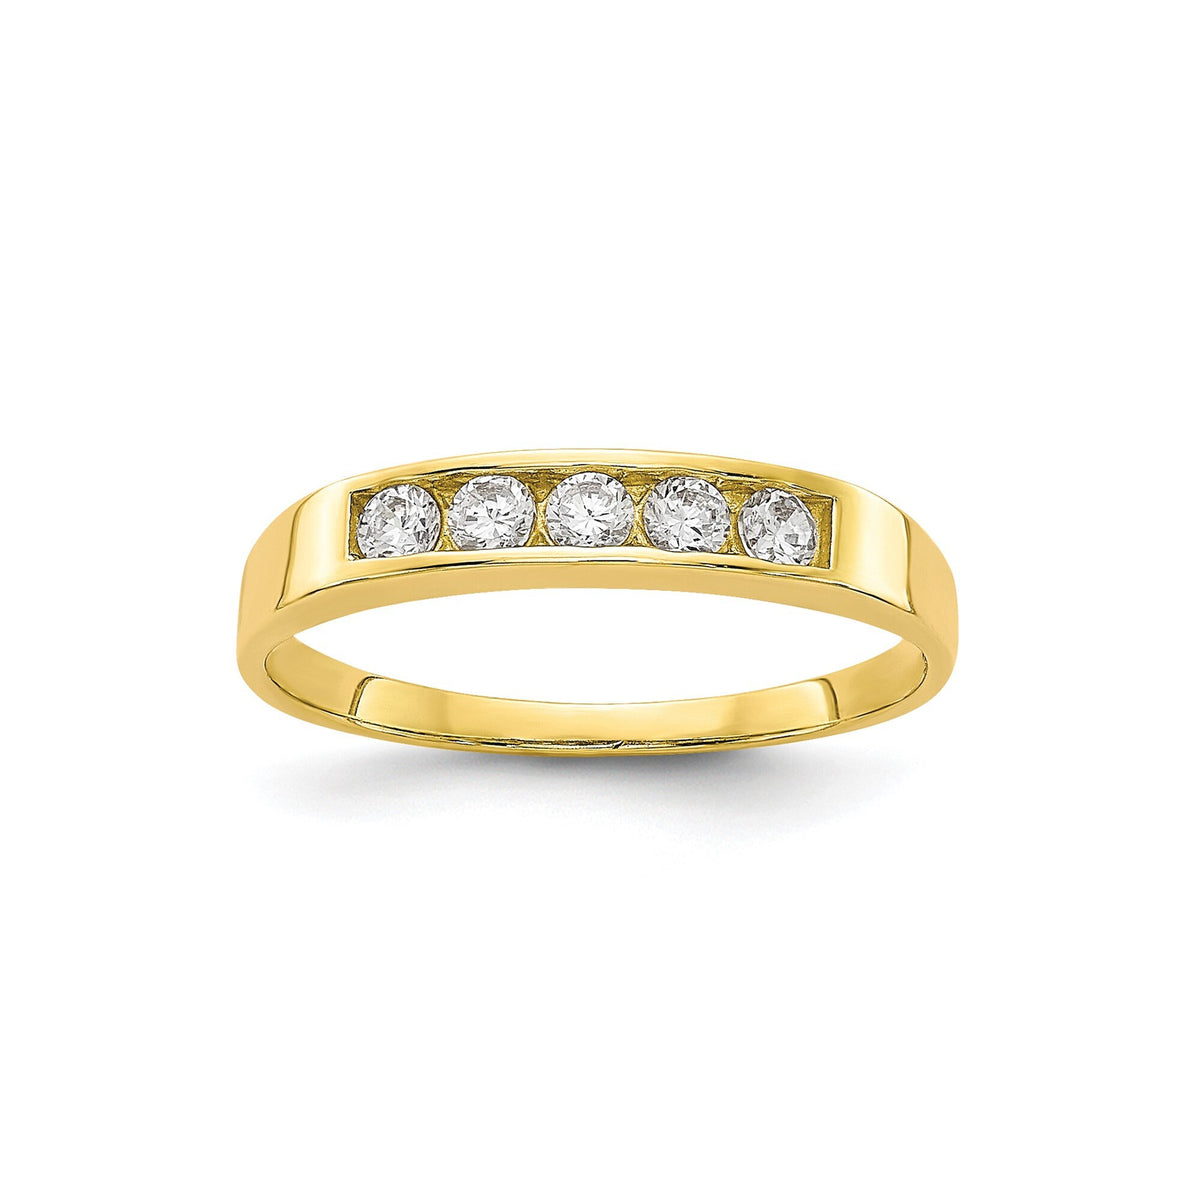 10k Yellow Gold CZ Ring Baby to Toddler Band Size 1- 5 (1-7 year olds) Baby to Toddler Size Children's CZ Ring Band Small Adult Size